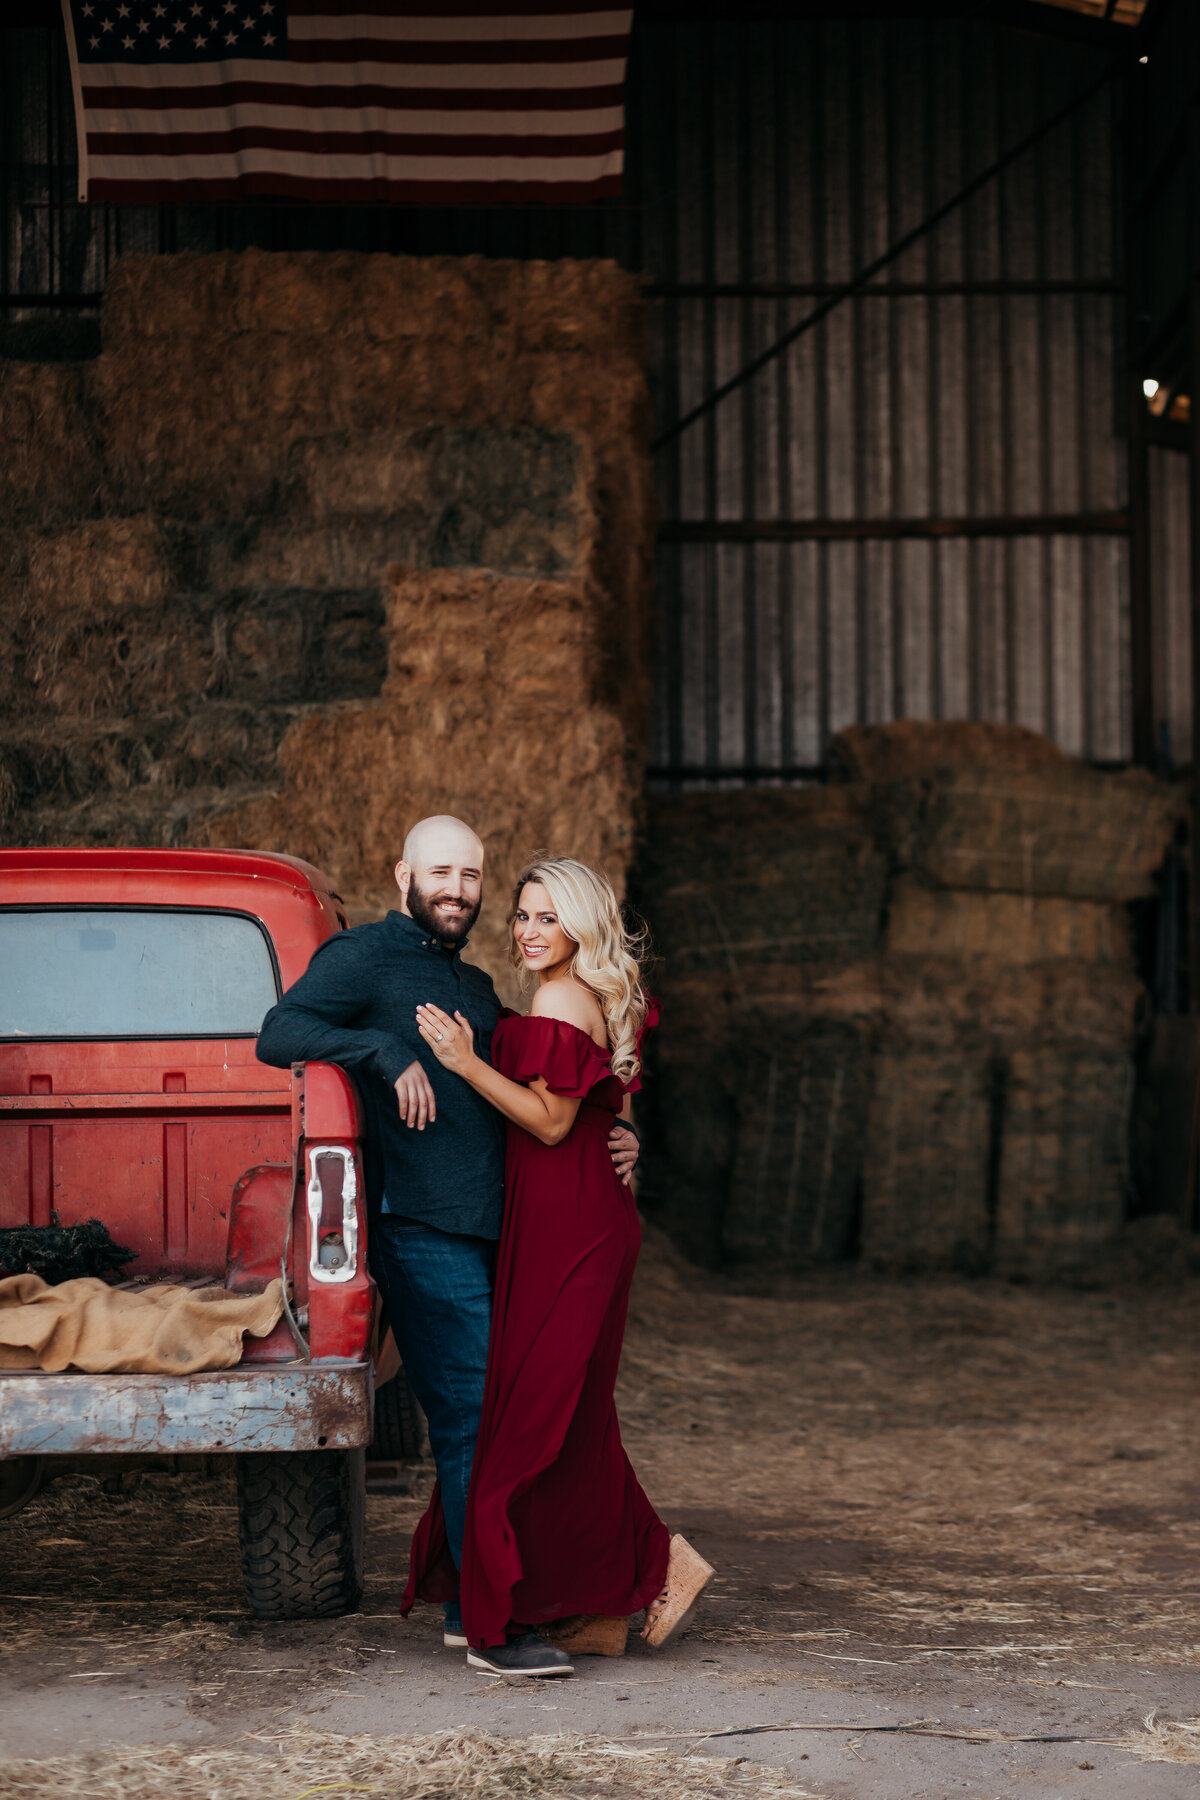 Brandon and Stephany were so easy to photograph. This is one of my very favorite engagement sessions of all time photographed out in Lodi California at West 12 Ranch. Stephanie is in a long burgundy gown with her hair down in light curls. Brandon matches her engagement dress so well wearing jeans and a dark grey colored long sleeve shirt. This session was photographed by Jolee Henley Photography out of Patterson California who specializes in engagement wedding and family photography. Jolee photographs all over California and the bay area.